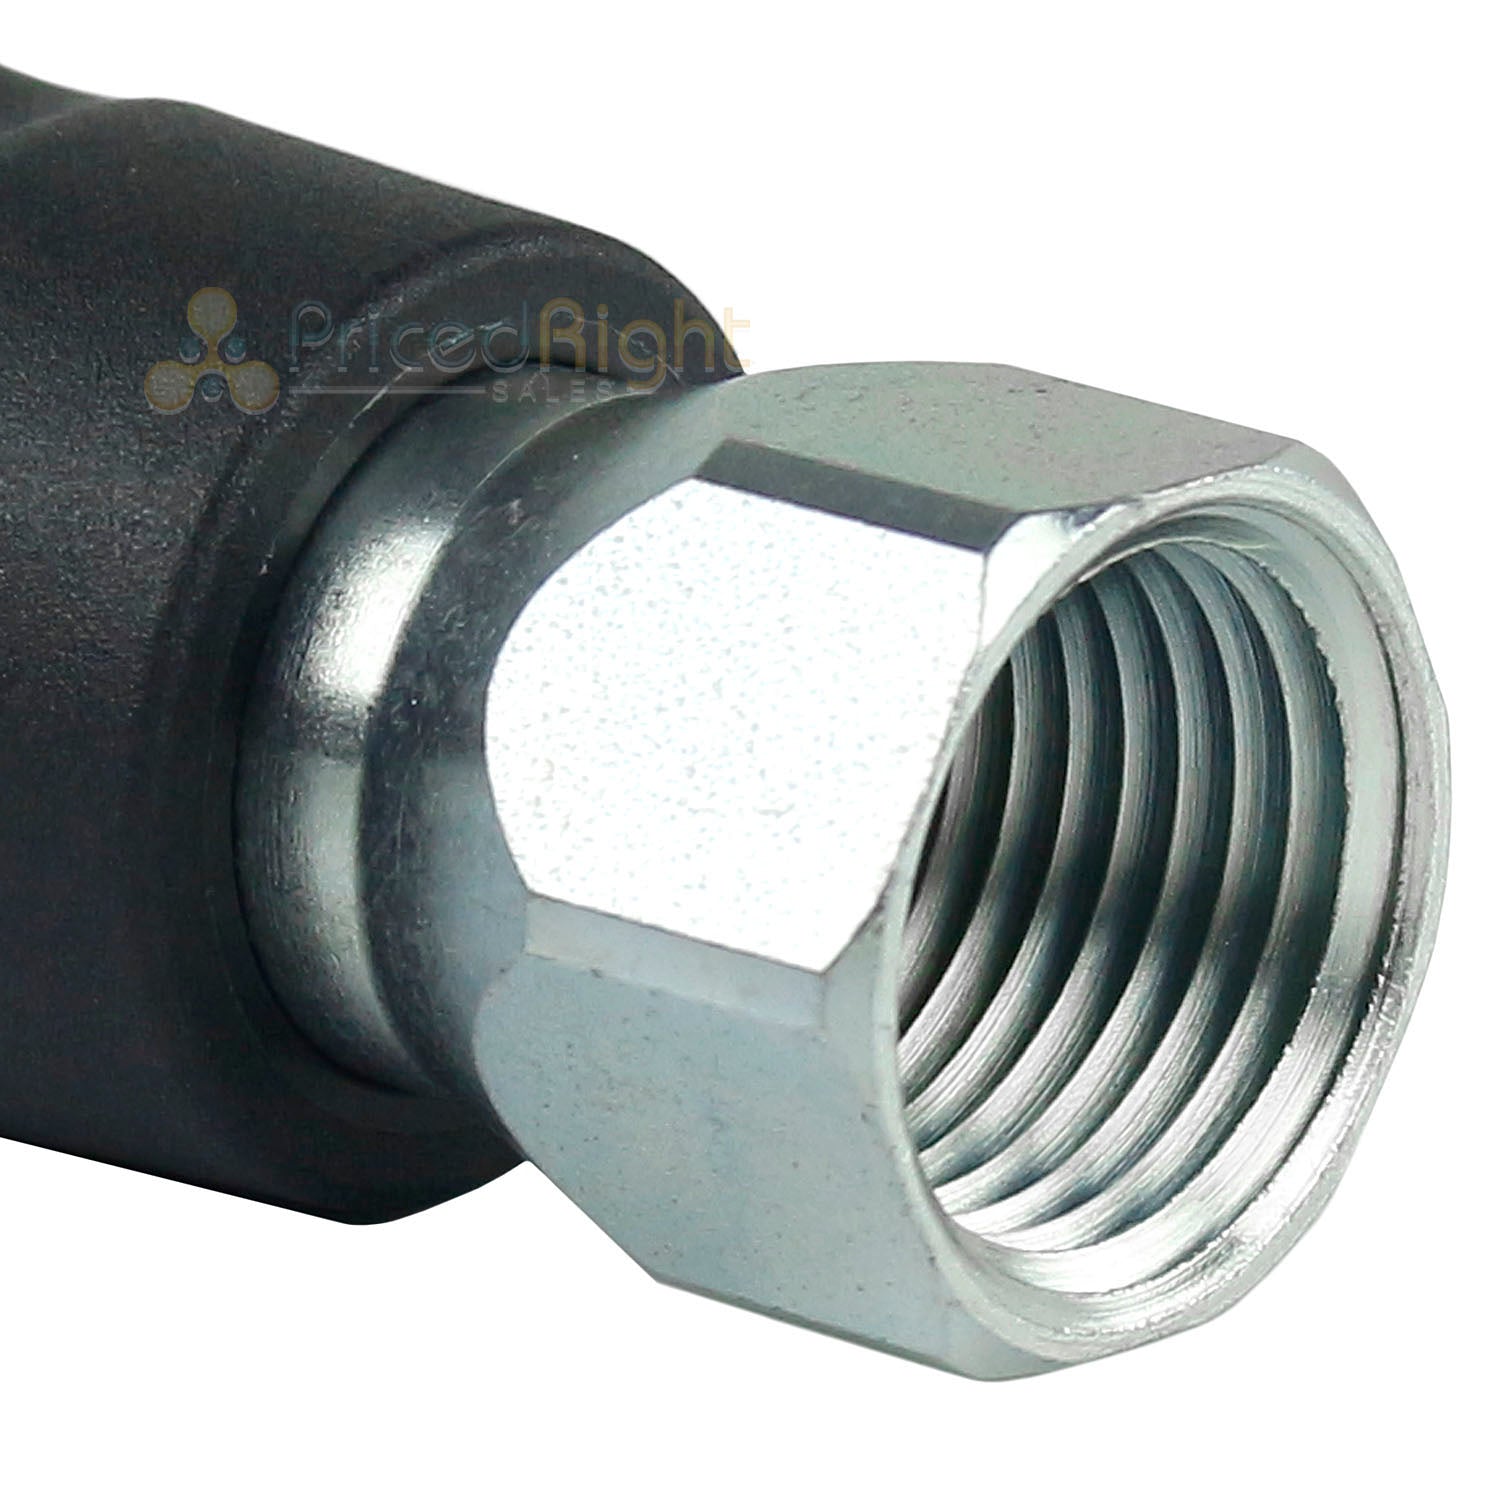 1/4" Prevost Safety Air Plug Coupler ISI061203 1/2" FNPT High Quality Prevo S1